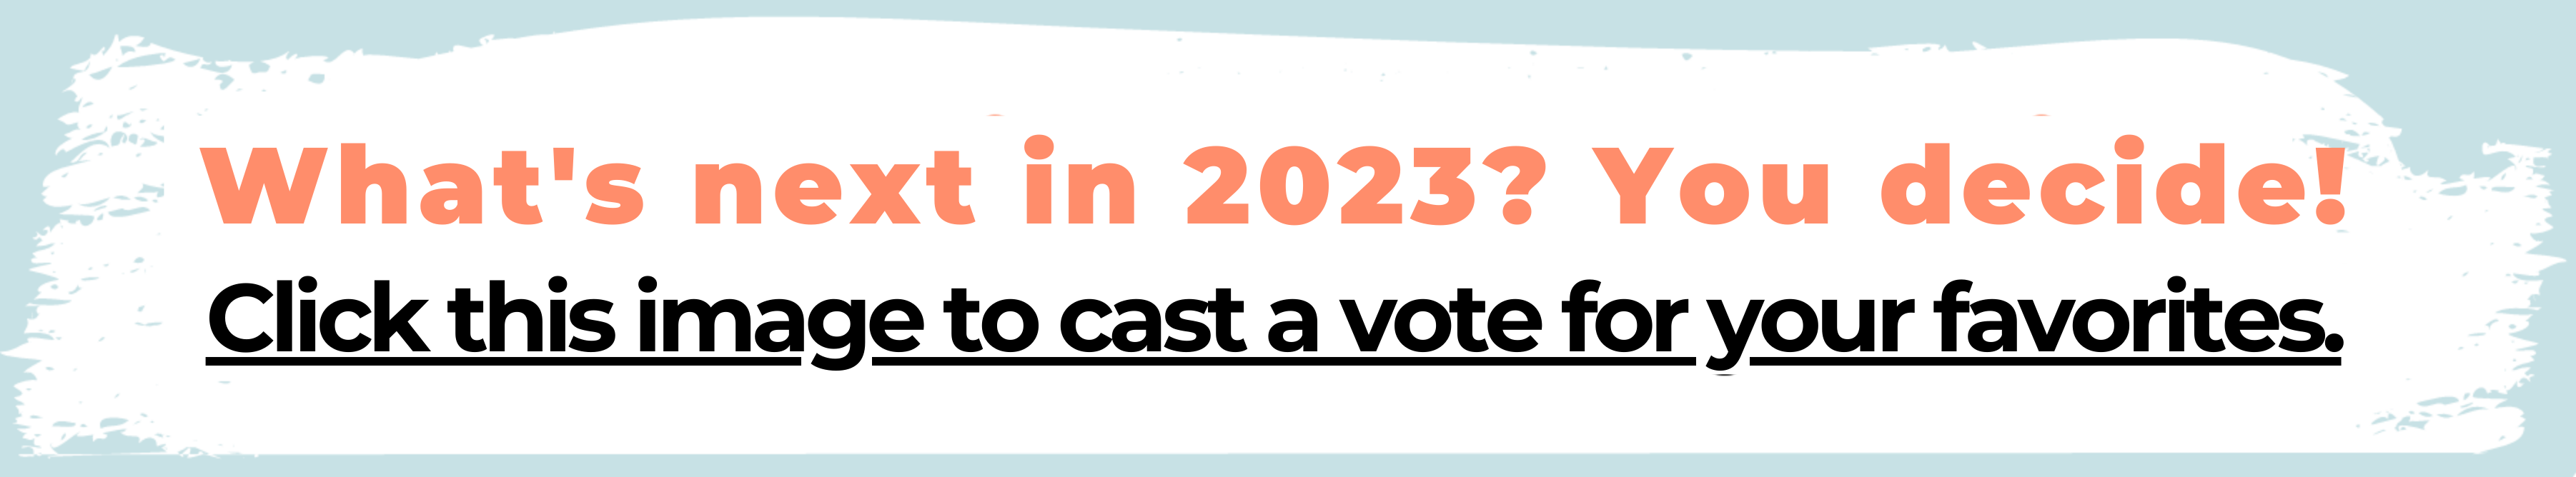 What's next in 2023? You decide! Click this image to cast a vote for your favorites.